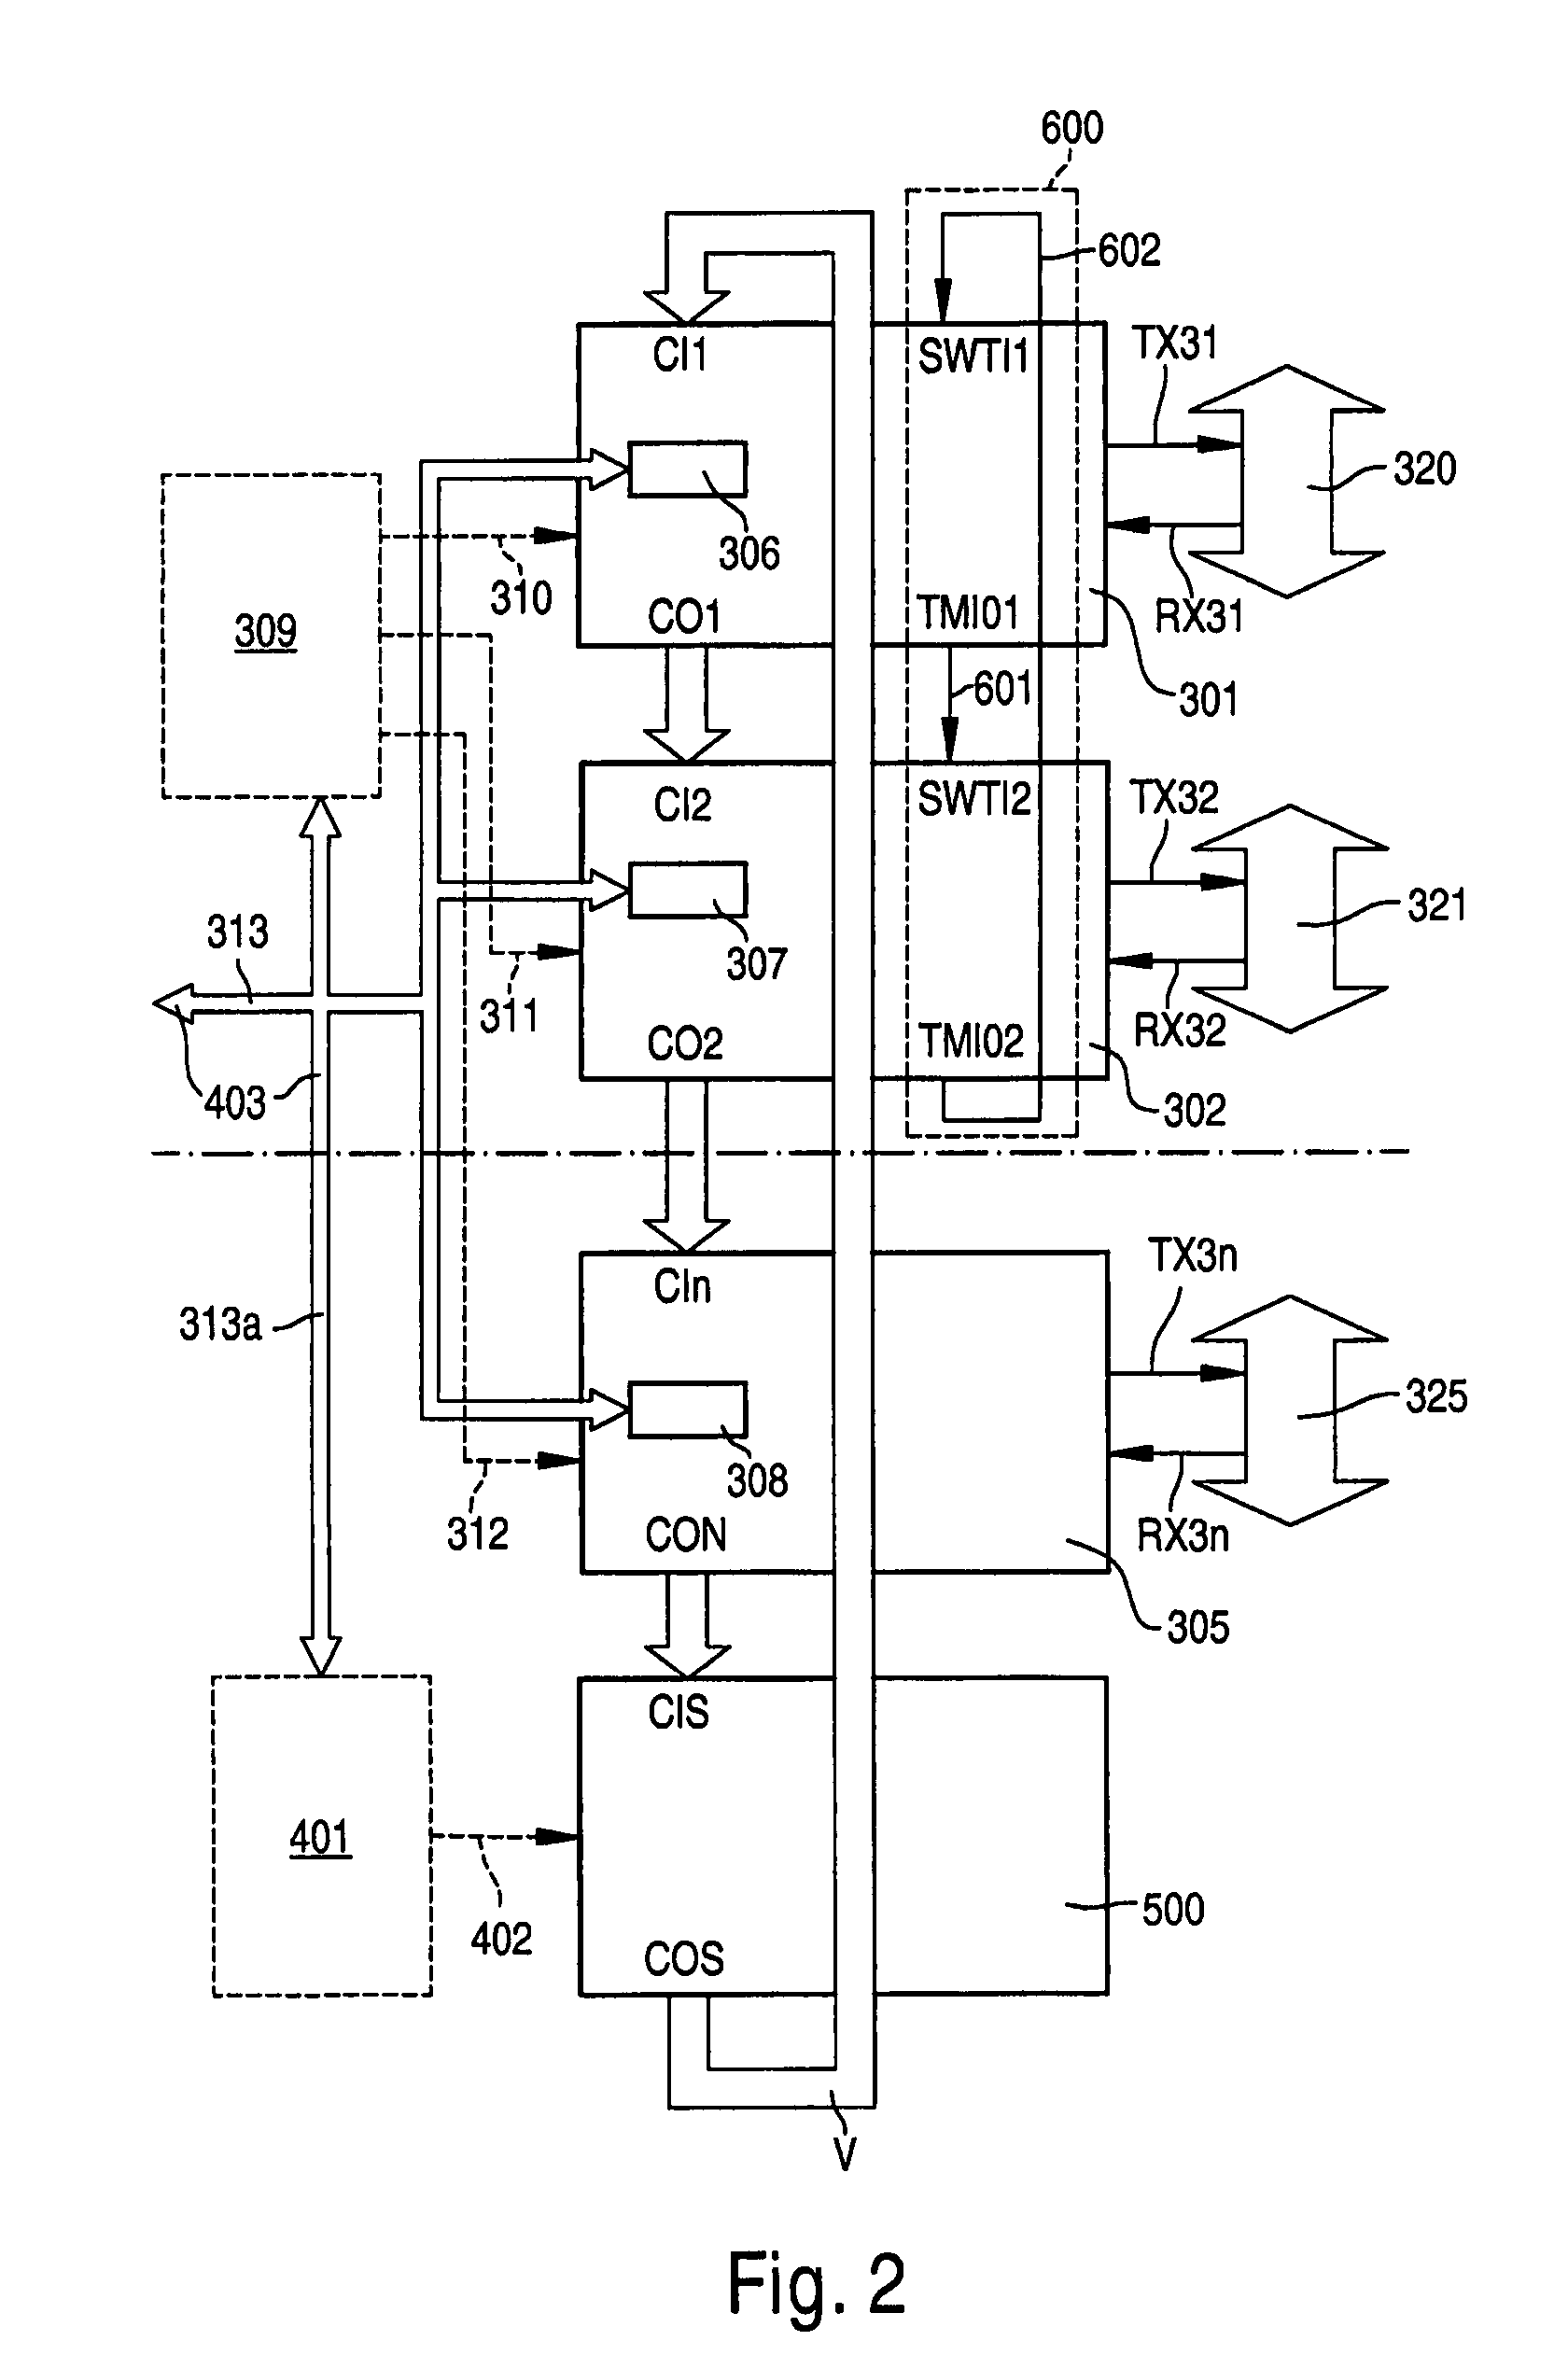 Method and device for synchronizing two bus systems by transmission of a time associated trigger signal from one system to another